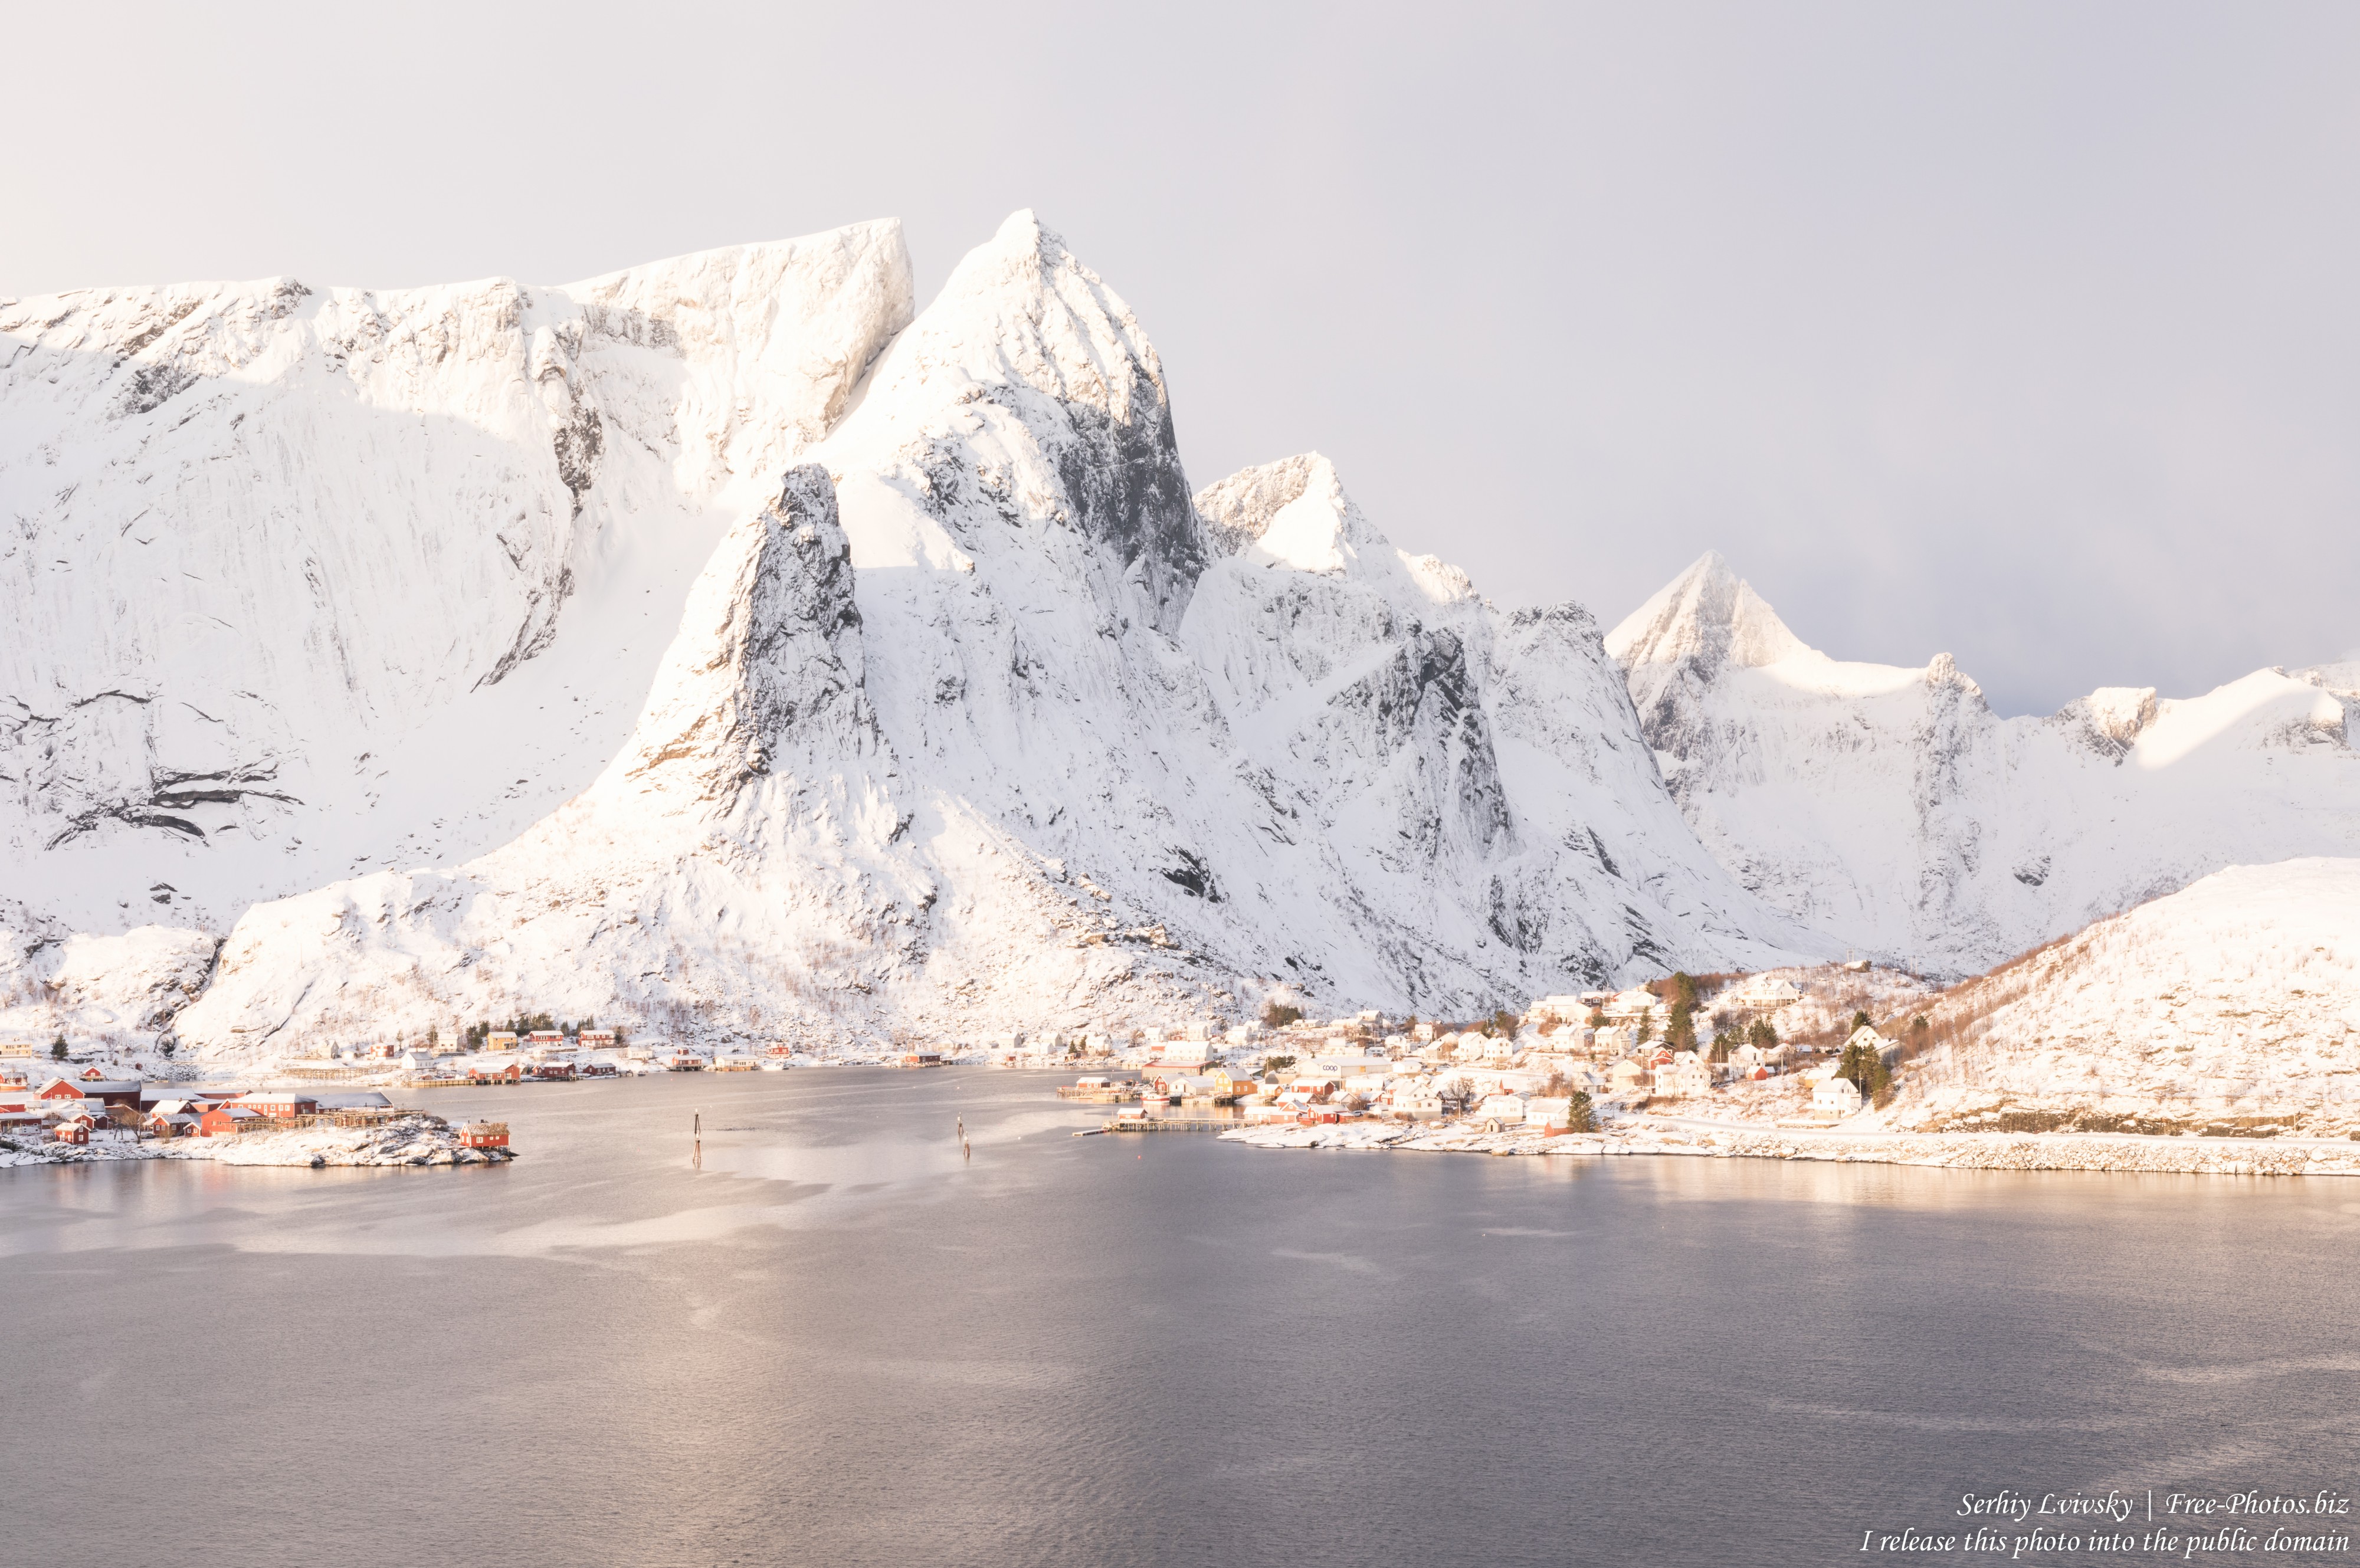 Sakrisoy and surroundings, Norway, in February 2020 by Serhiy Lvivsky, picture 28